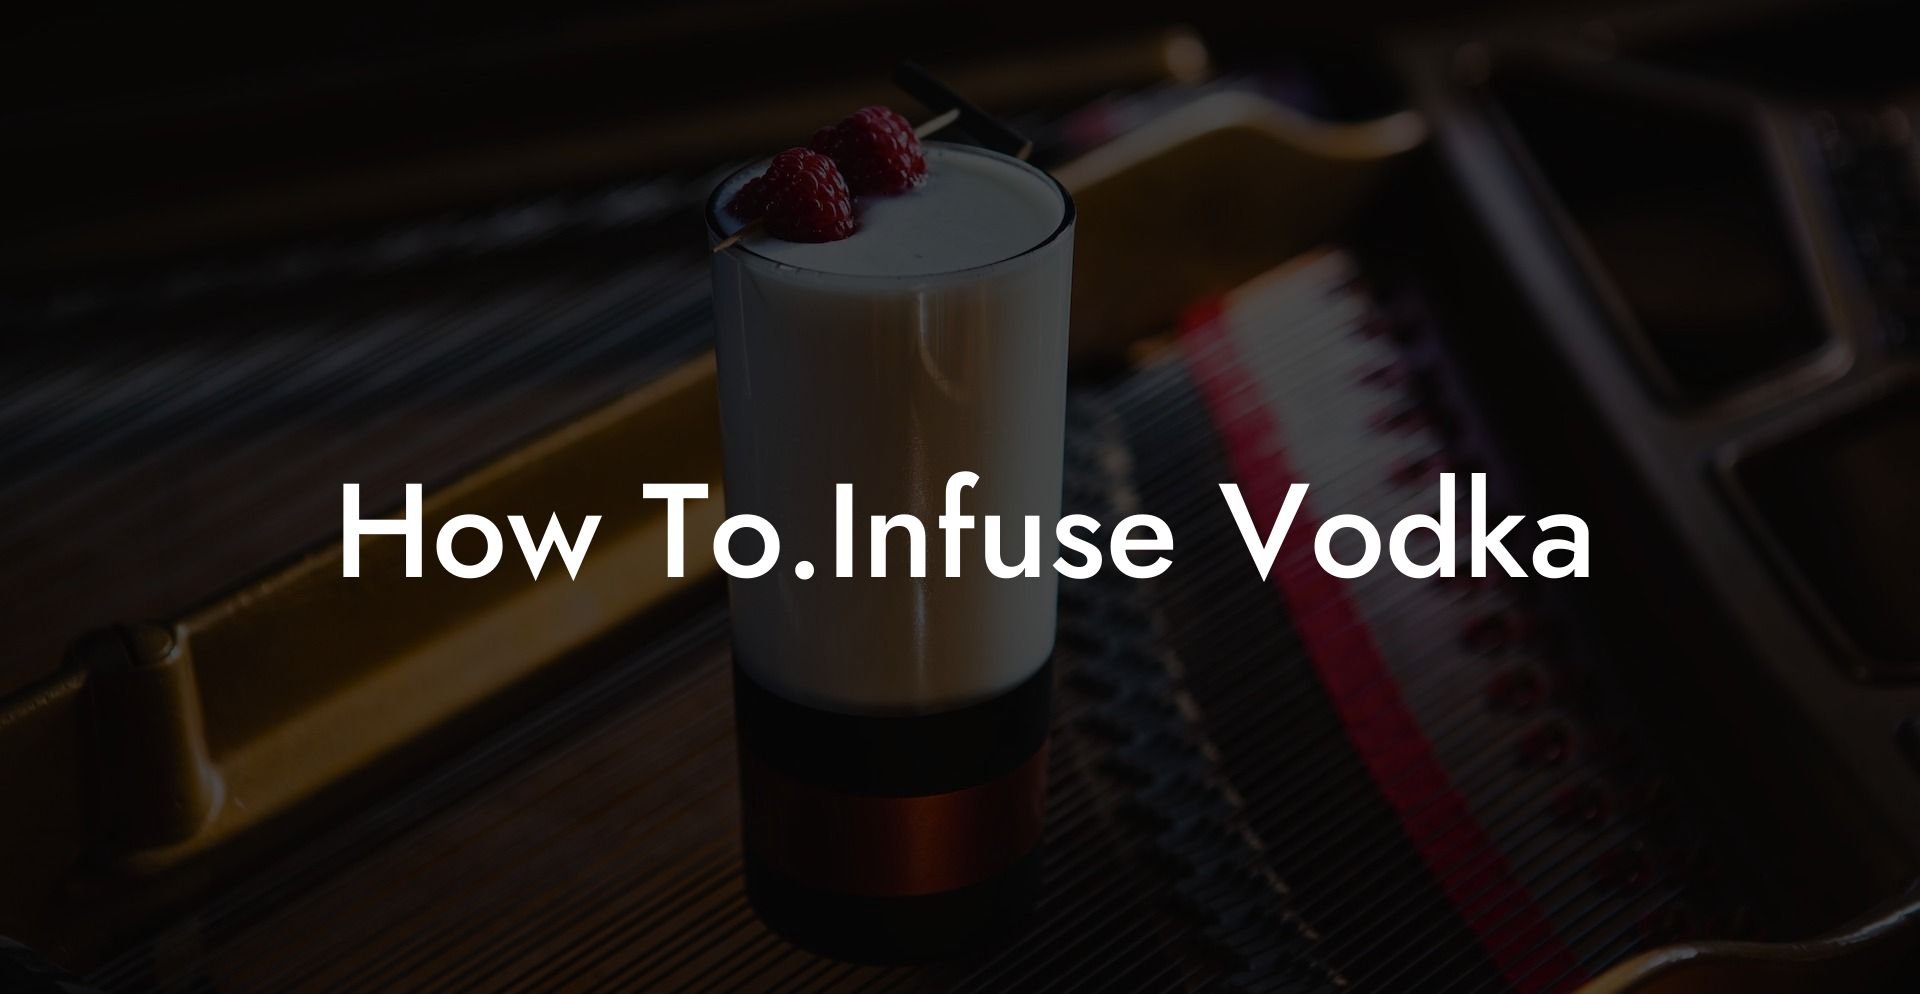 How To.Infuse Vodka